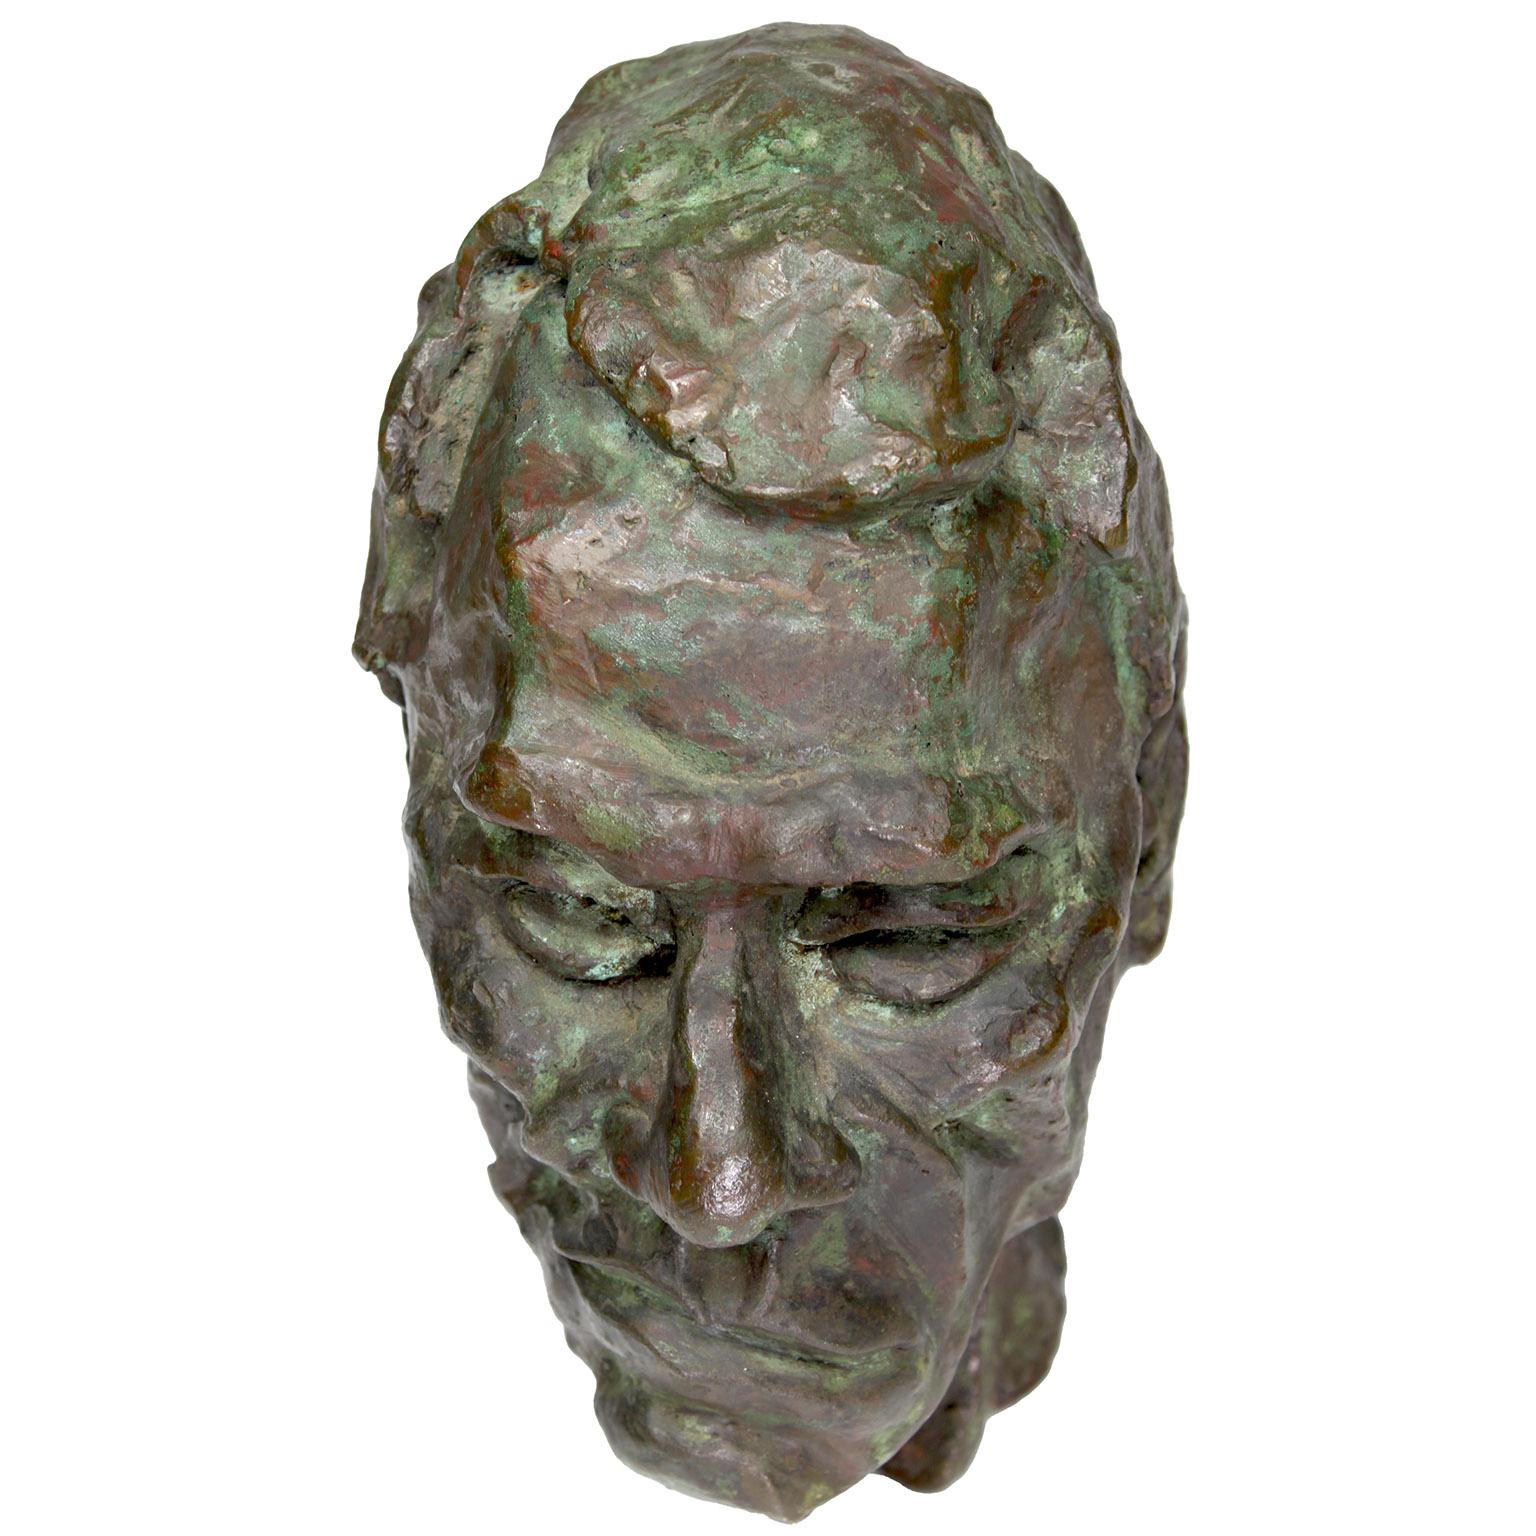 A Fine Bronze Bust of a man in the manner of Sir Jacob Epstein (British, 1880-1959), artist unknown. This beautifully executed green-patinated bronze somewhat resembles the style of Epstein's bust of Josef Holbrooke (1978-1958) who was an English